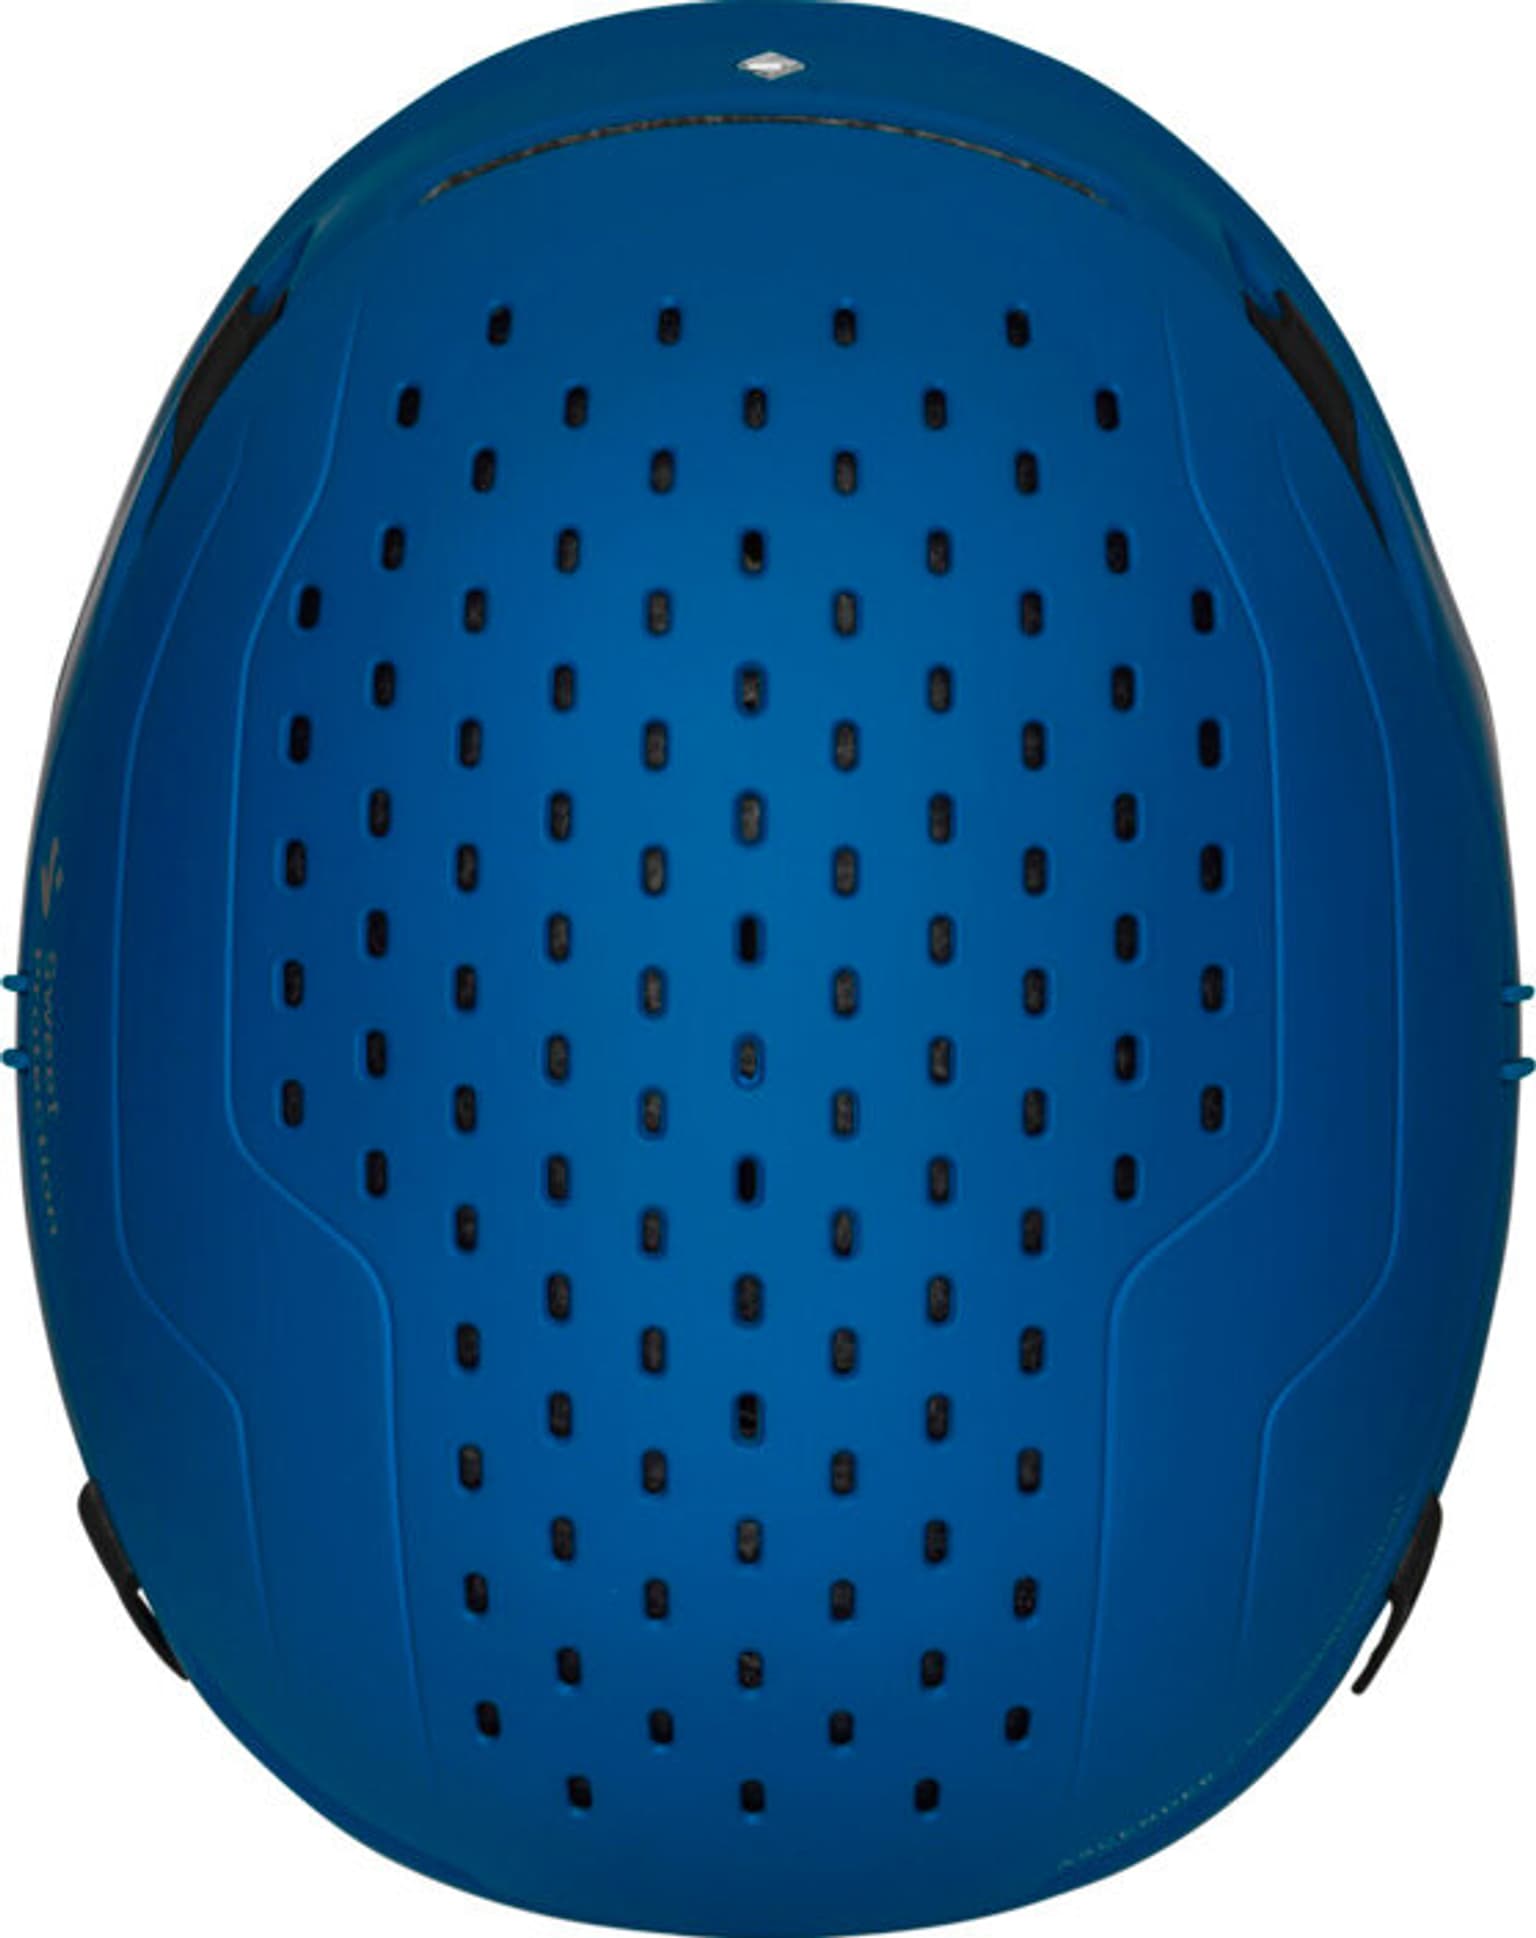 Sweet Protection Sweet Protection Ascender Mips Casco da sci blu 4